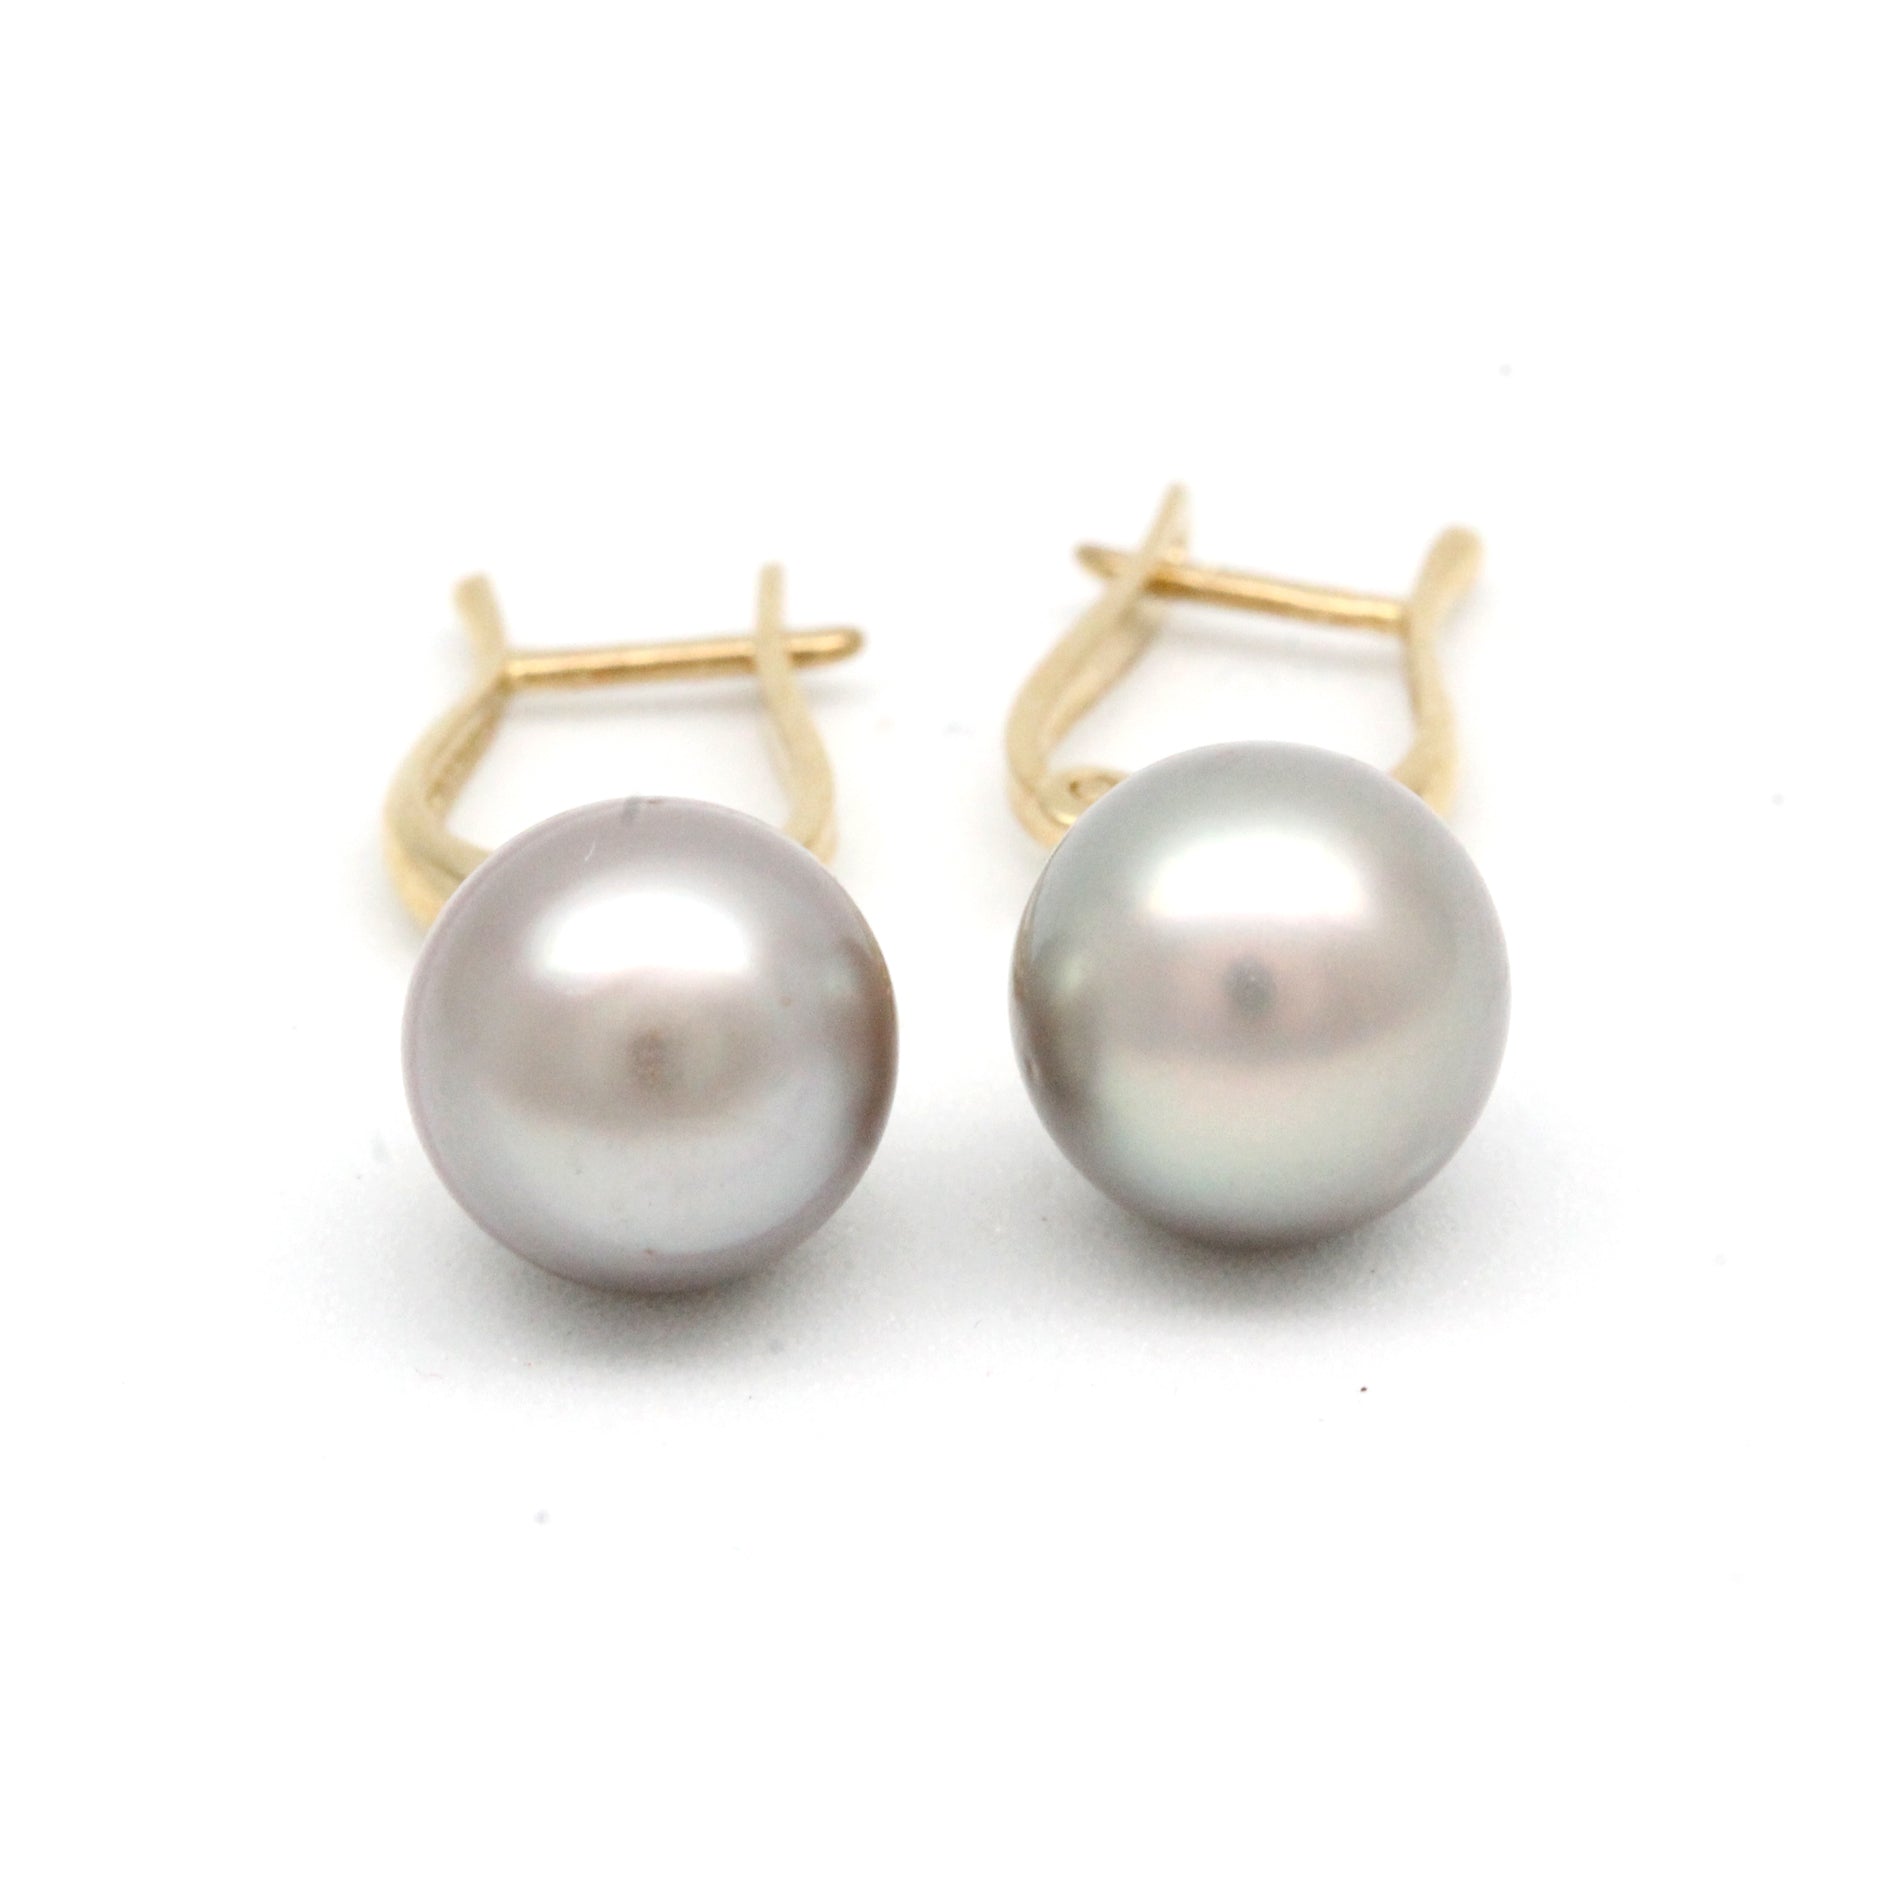 "Lyre" 14K Yellow Gold Earrings with Cortez Pearls